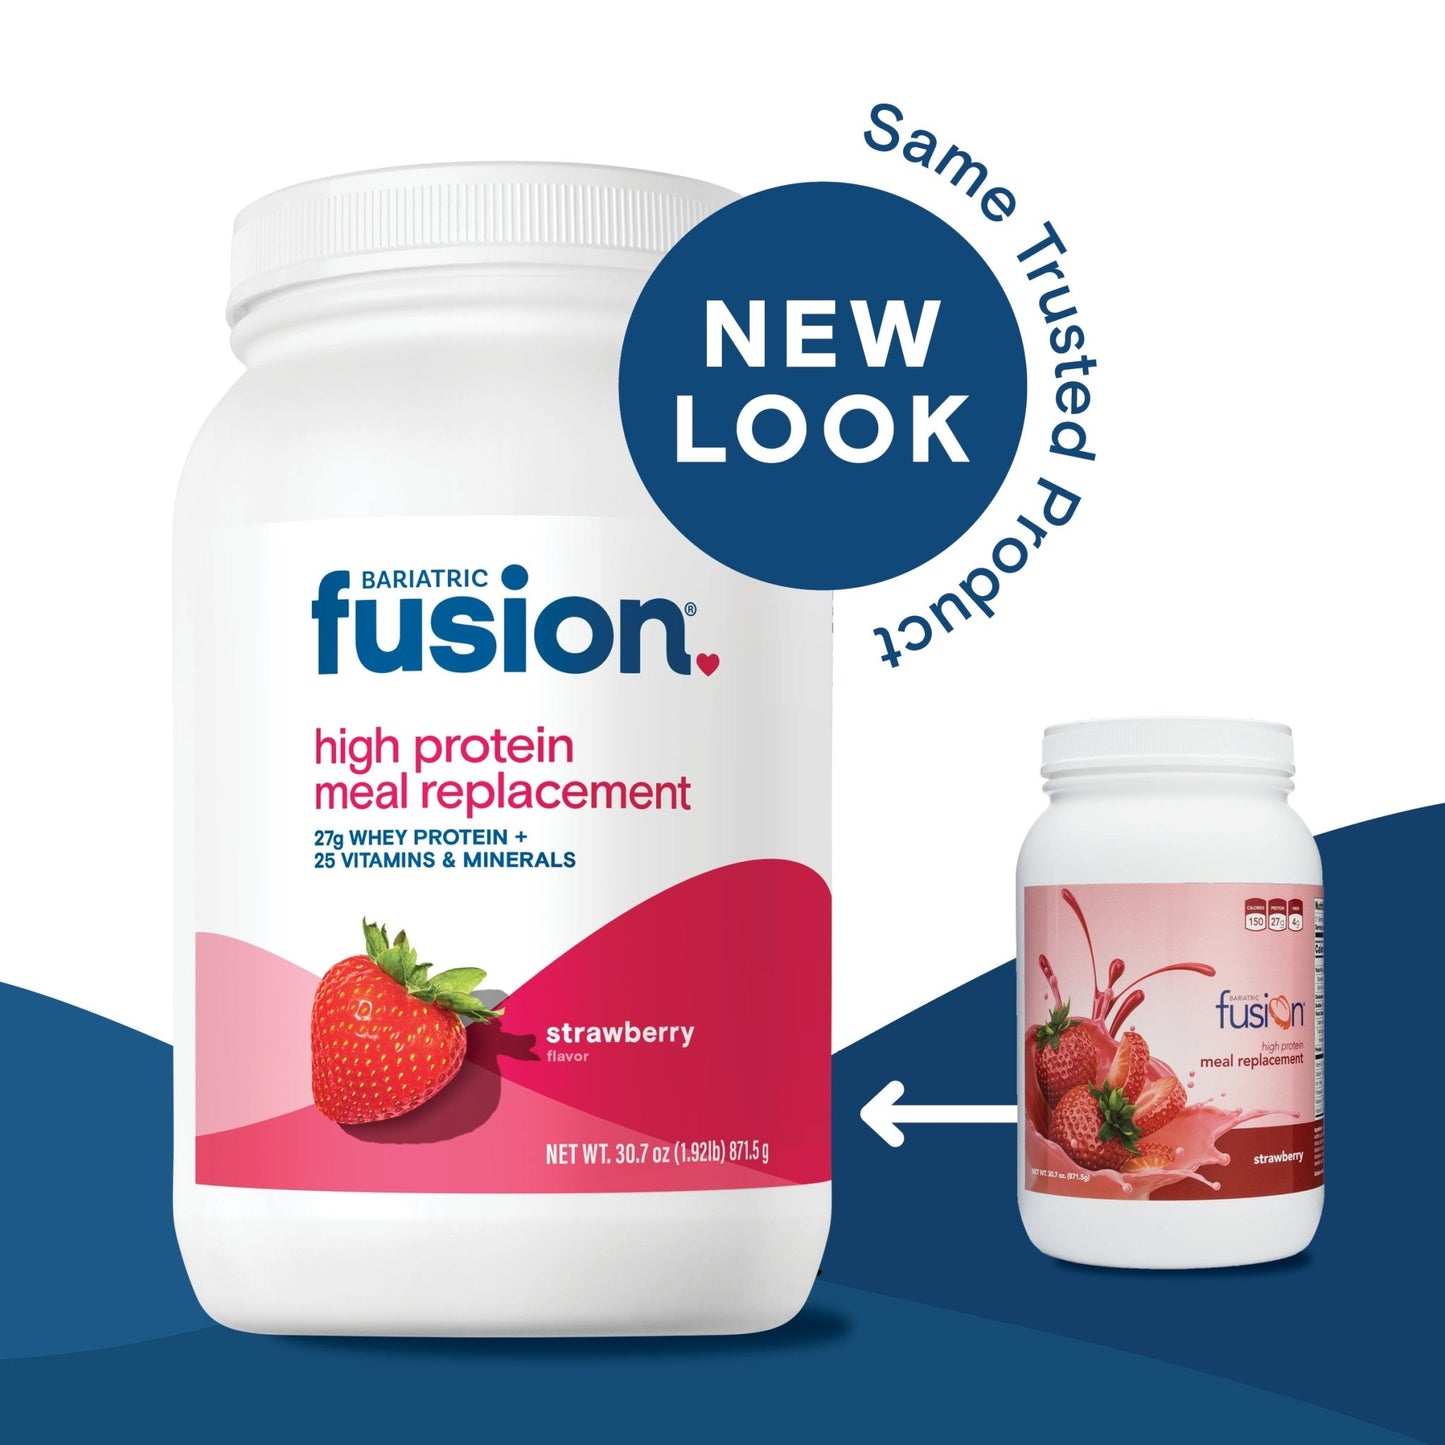 Bariatric Fusion Strawberry High Protein Meal Replacement new look, same trusted product.